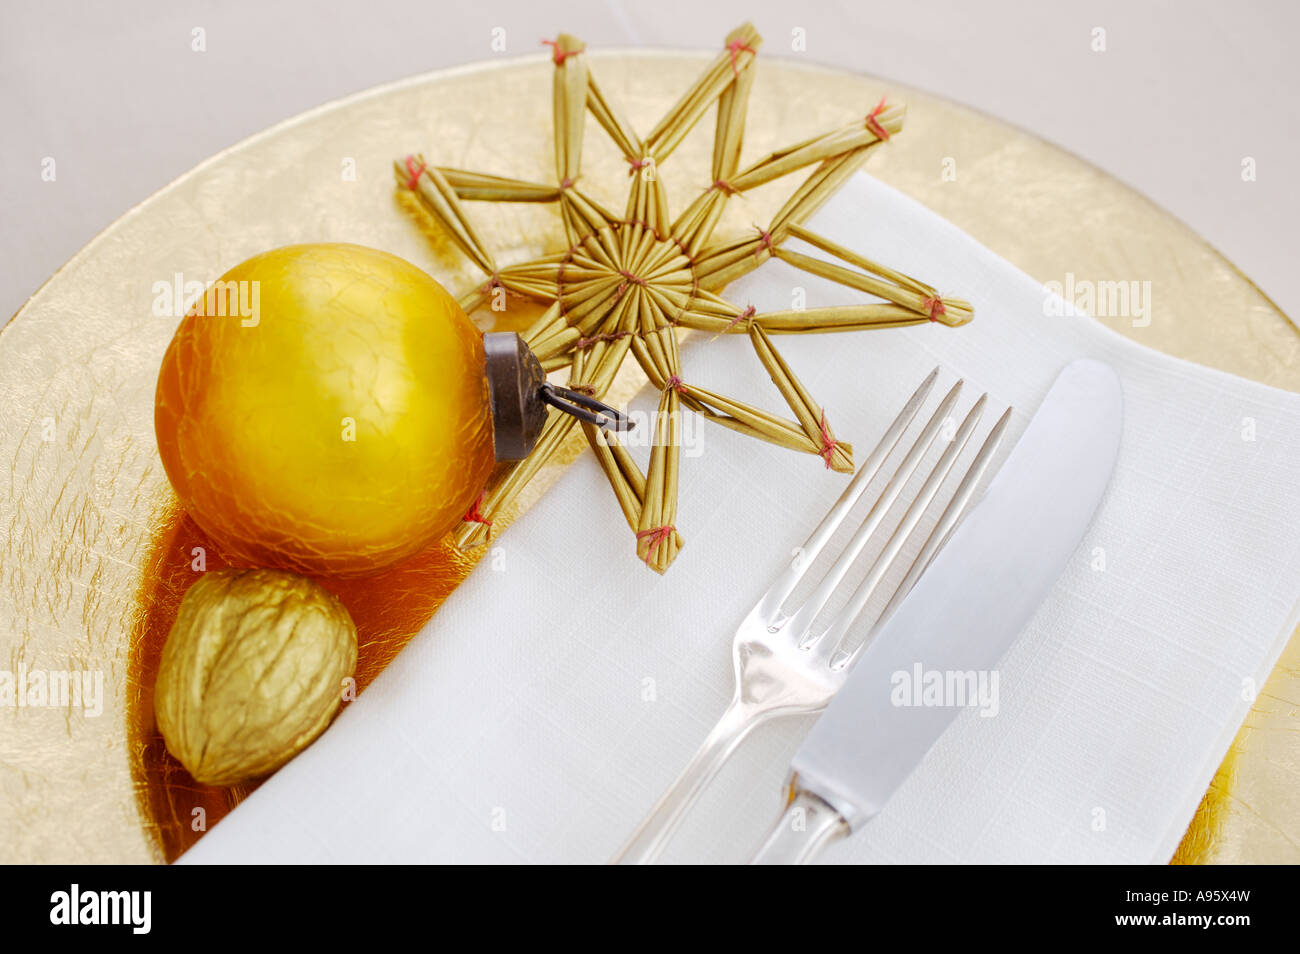 Table setting with golden Christmas decoration Stock Photo